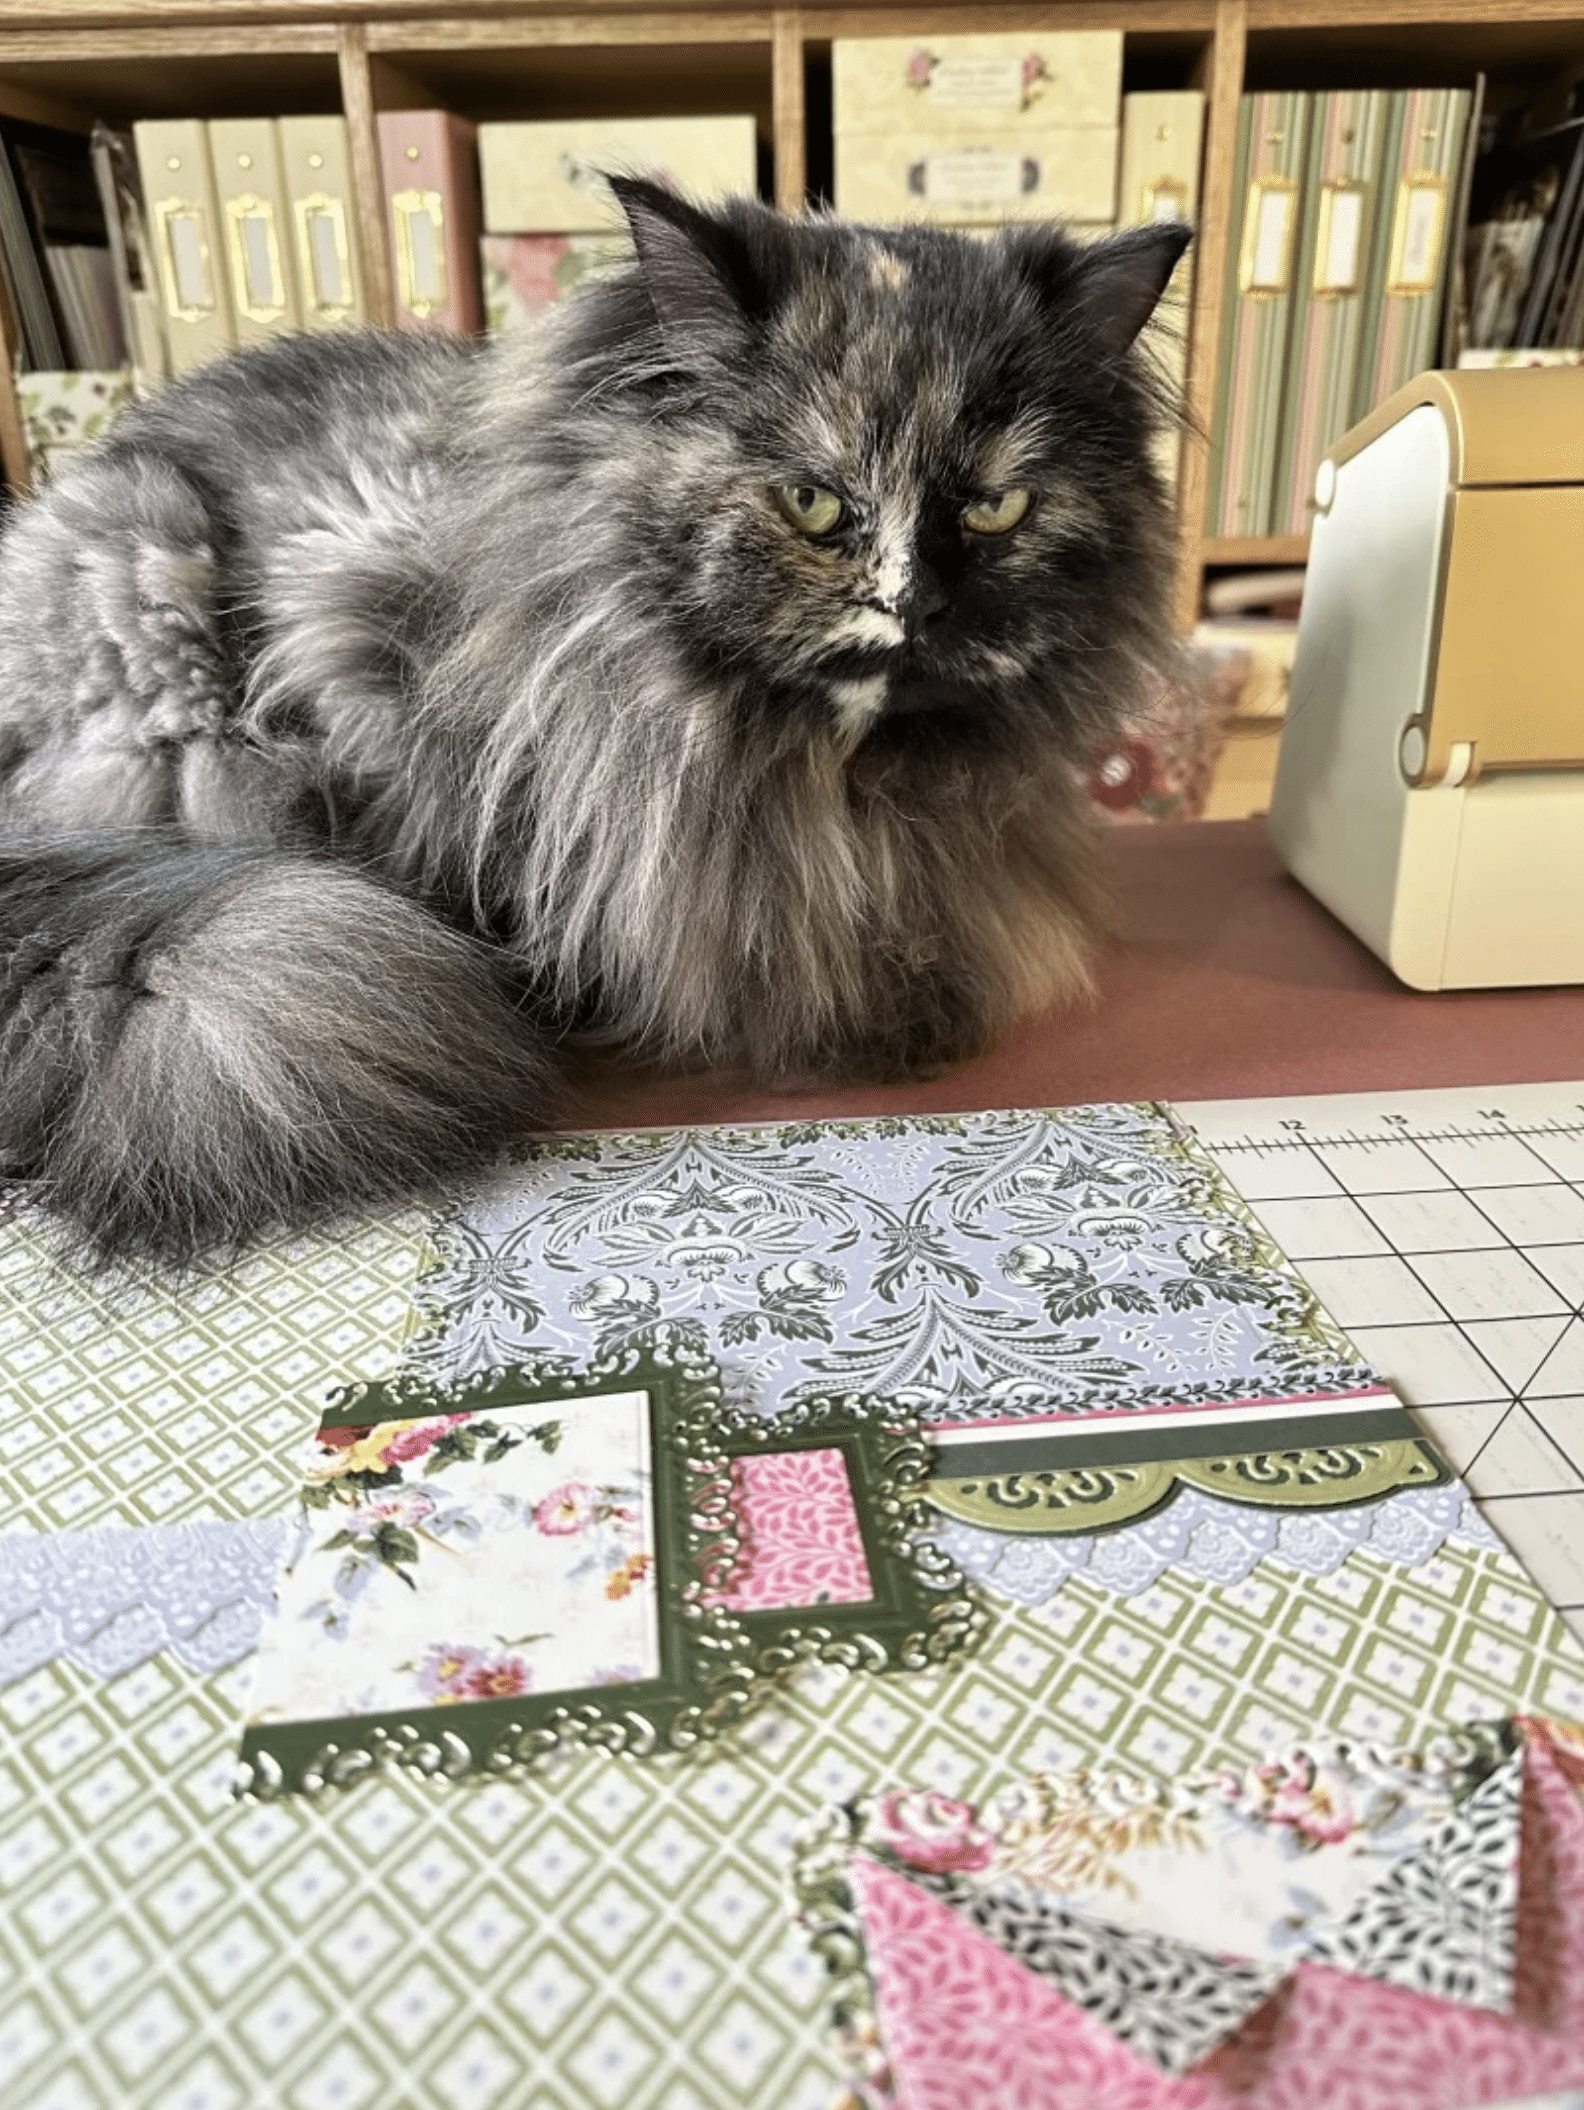 a cat sitting on a table next to a quilt.